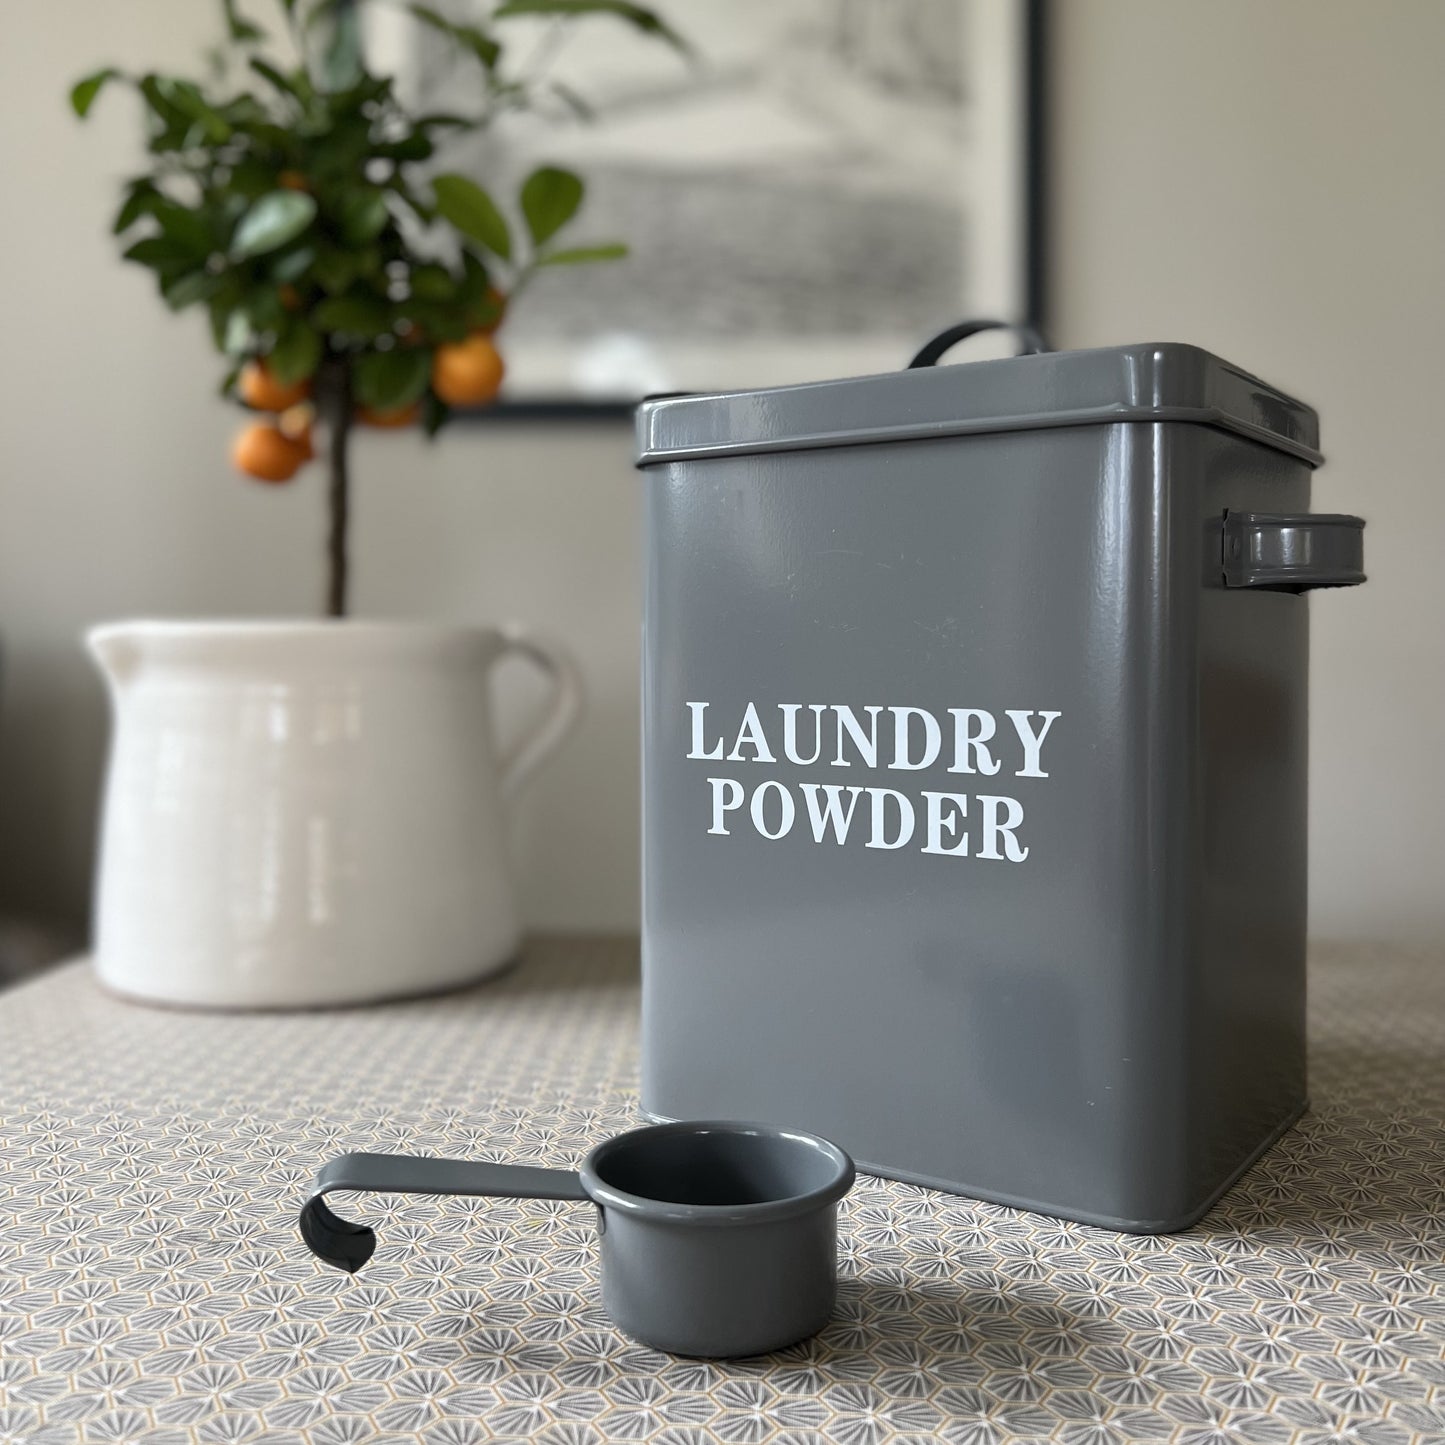 Washing Up and Laundry Storage Tins In French Grey